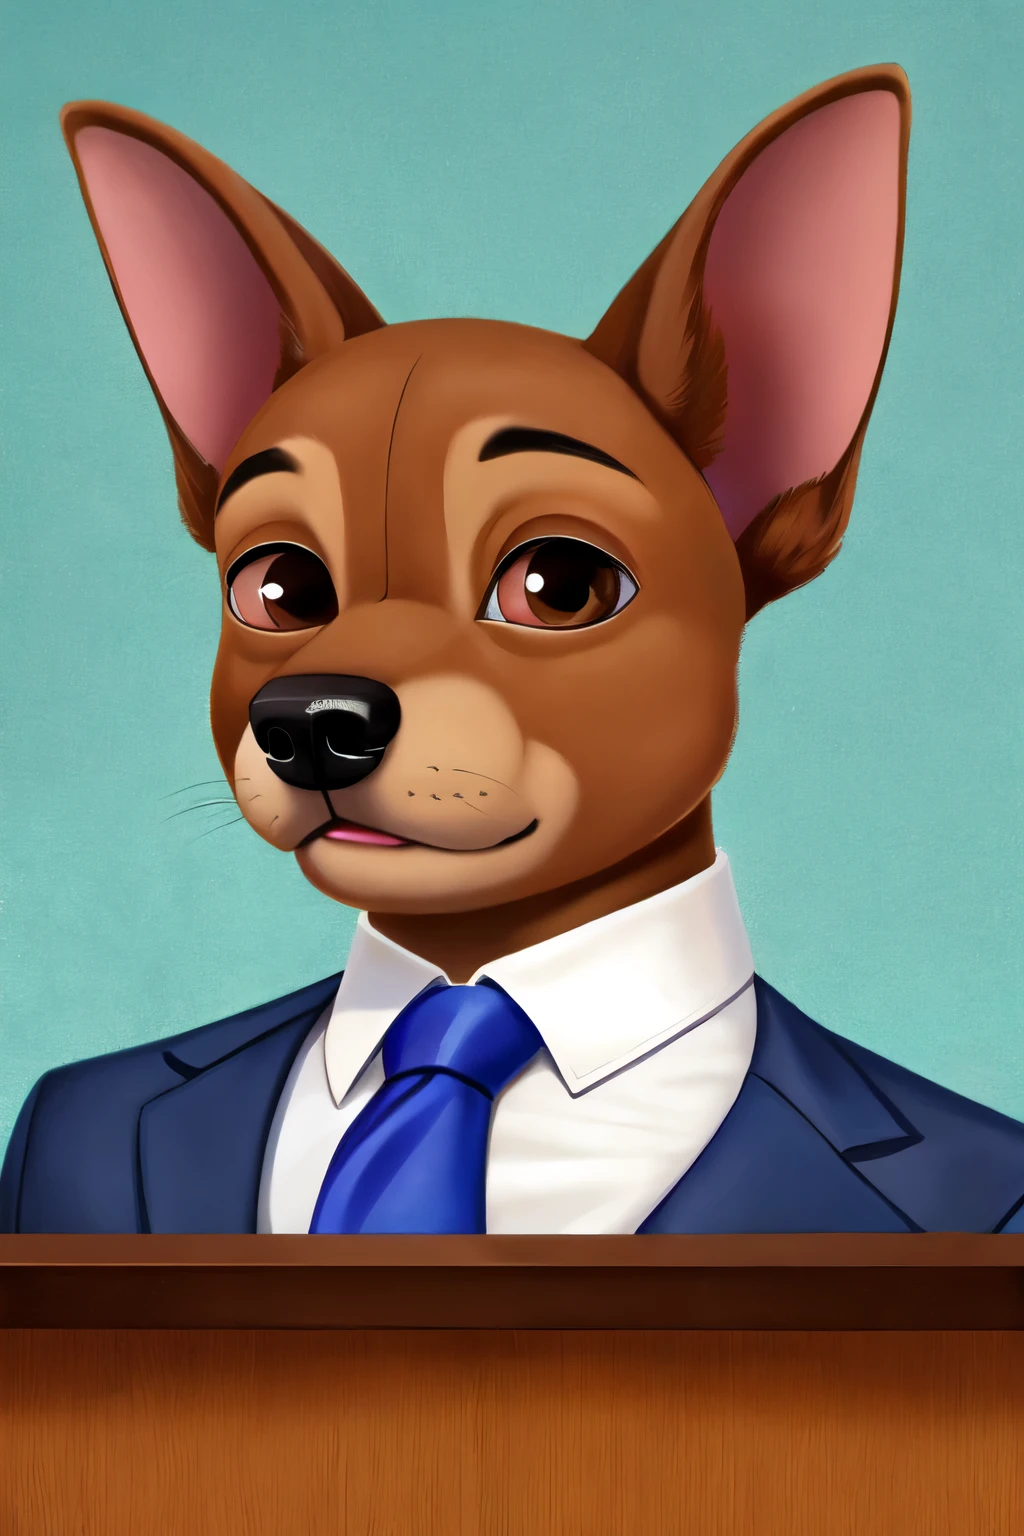 A smart brown chihuahua that looks like a banker